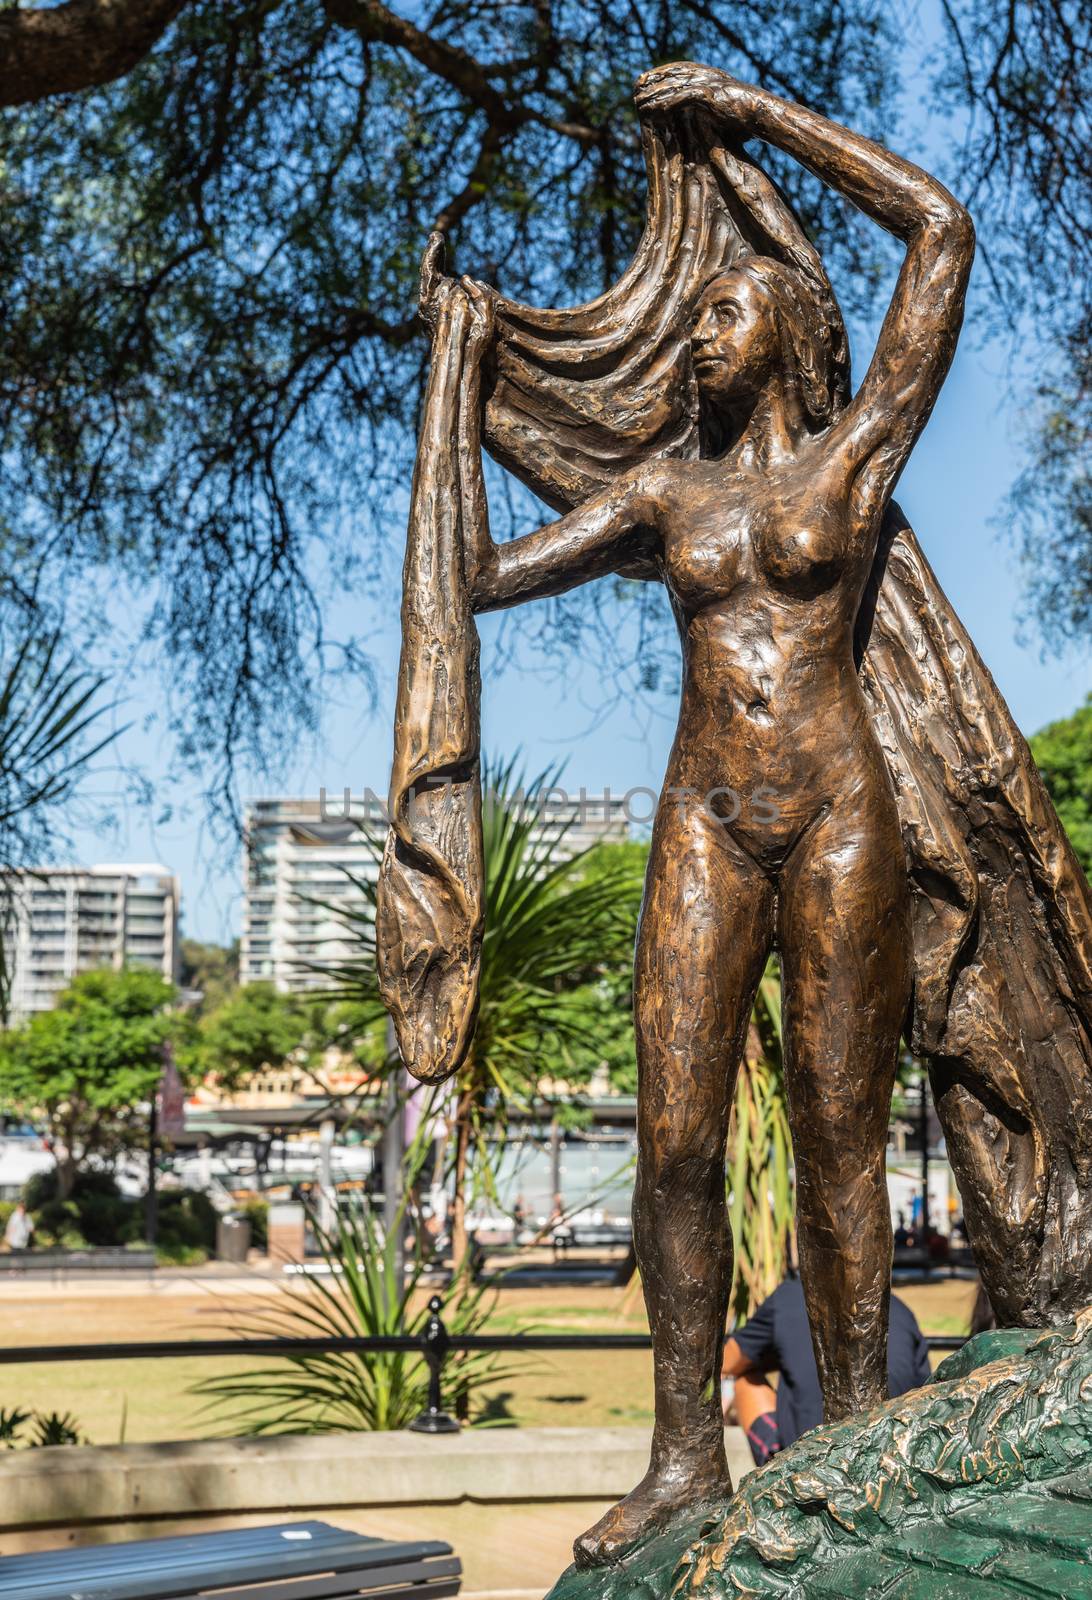 Sydney, Australia - February 11, 2019: Closeup of part of Salvador Dali statue copy in First Fleet Park near Circular Bay, labeled Nobility of Time, set under green tree foliage with the bay and its buildings in back.